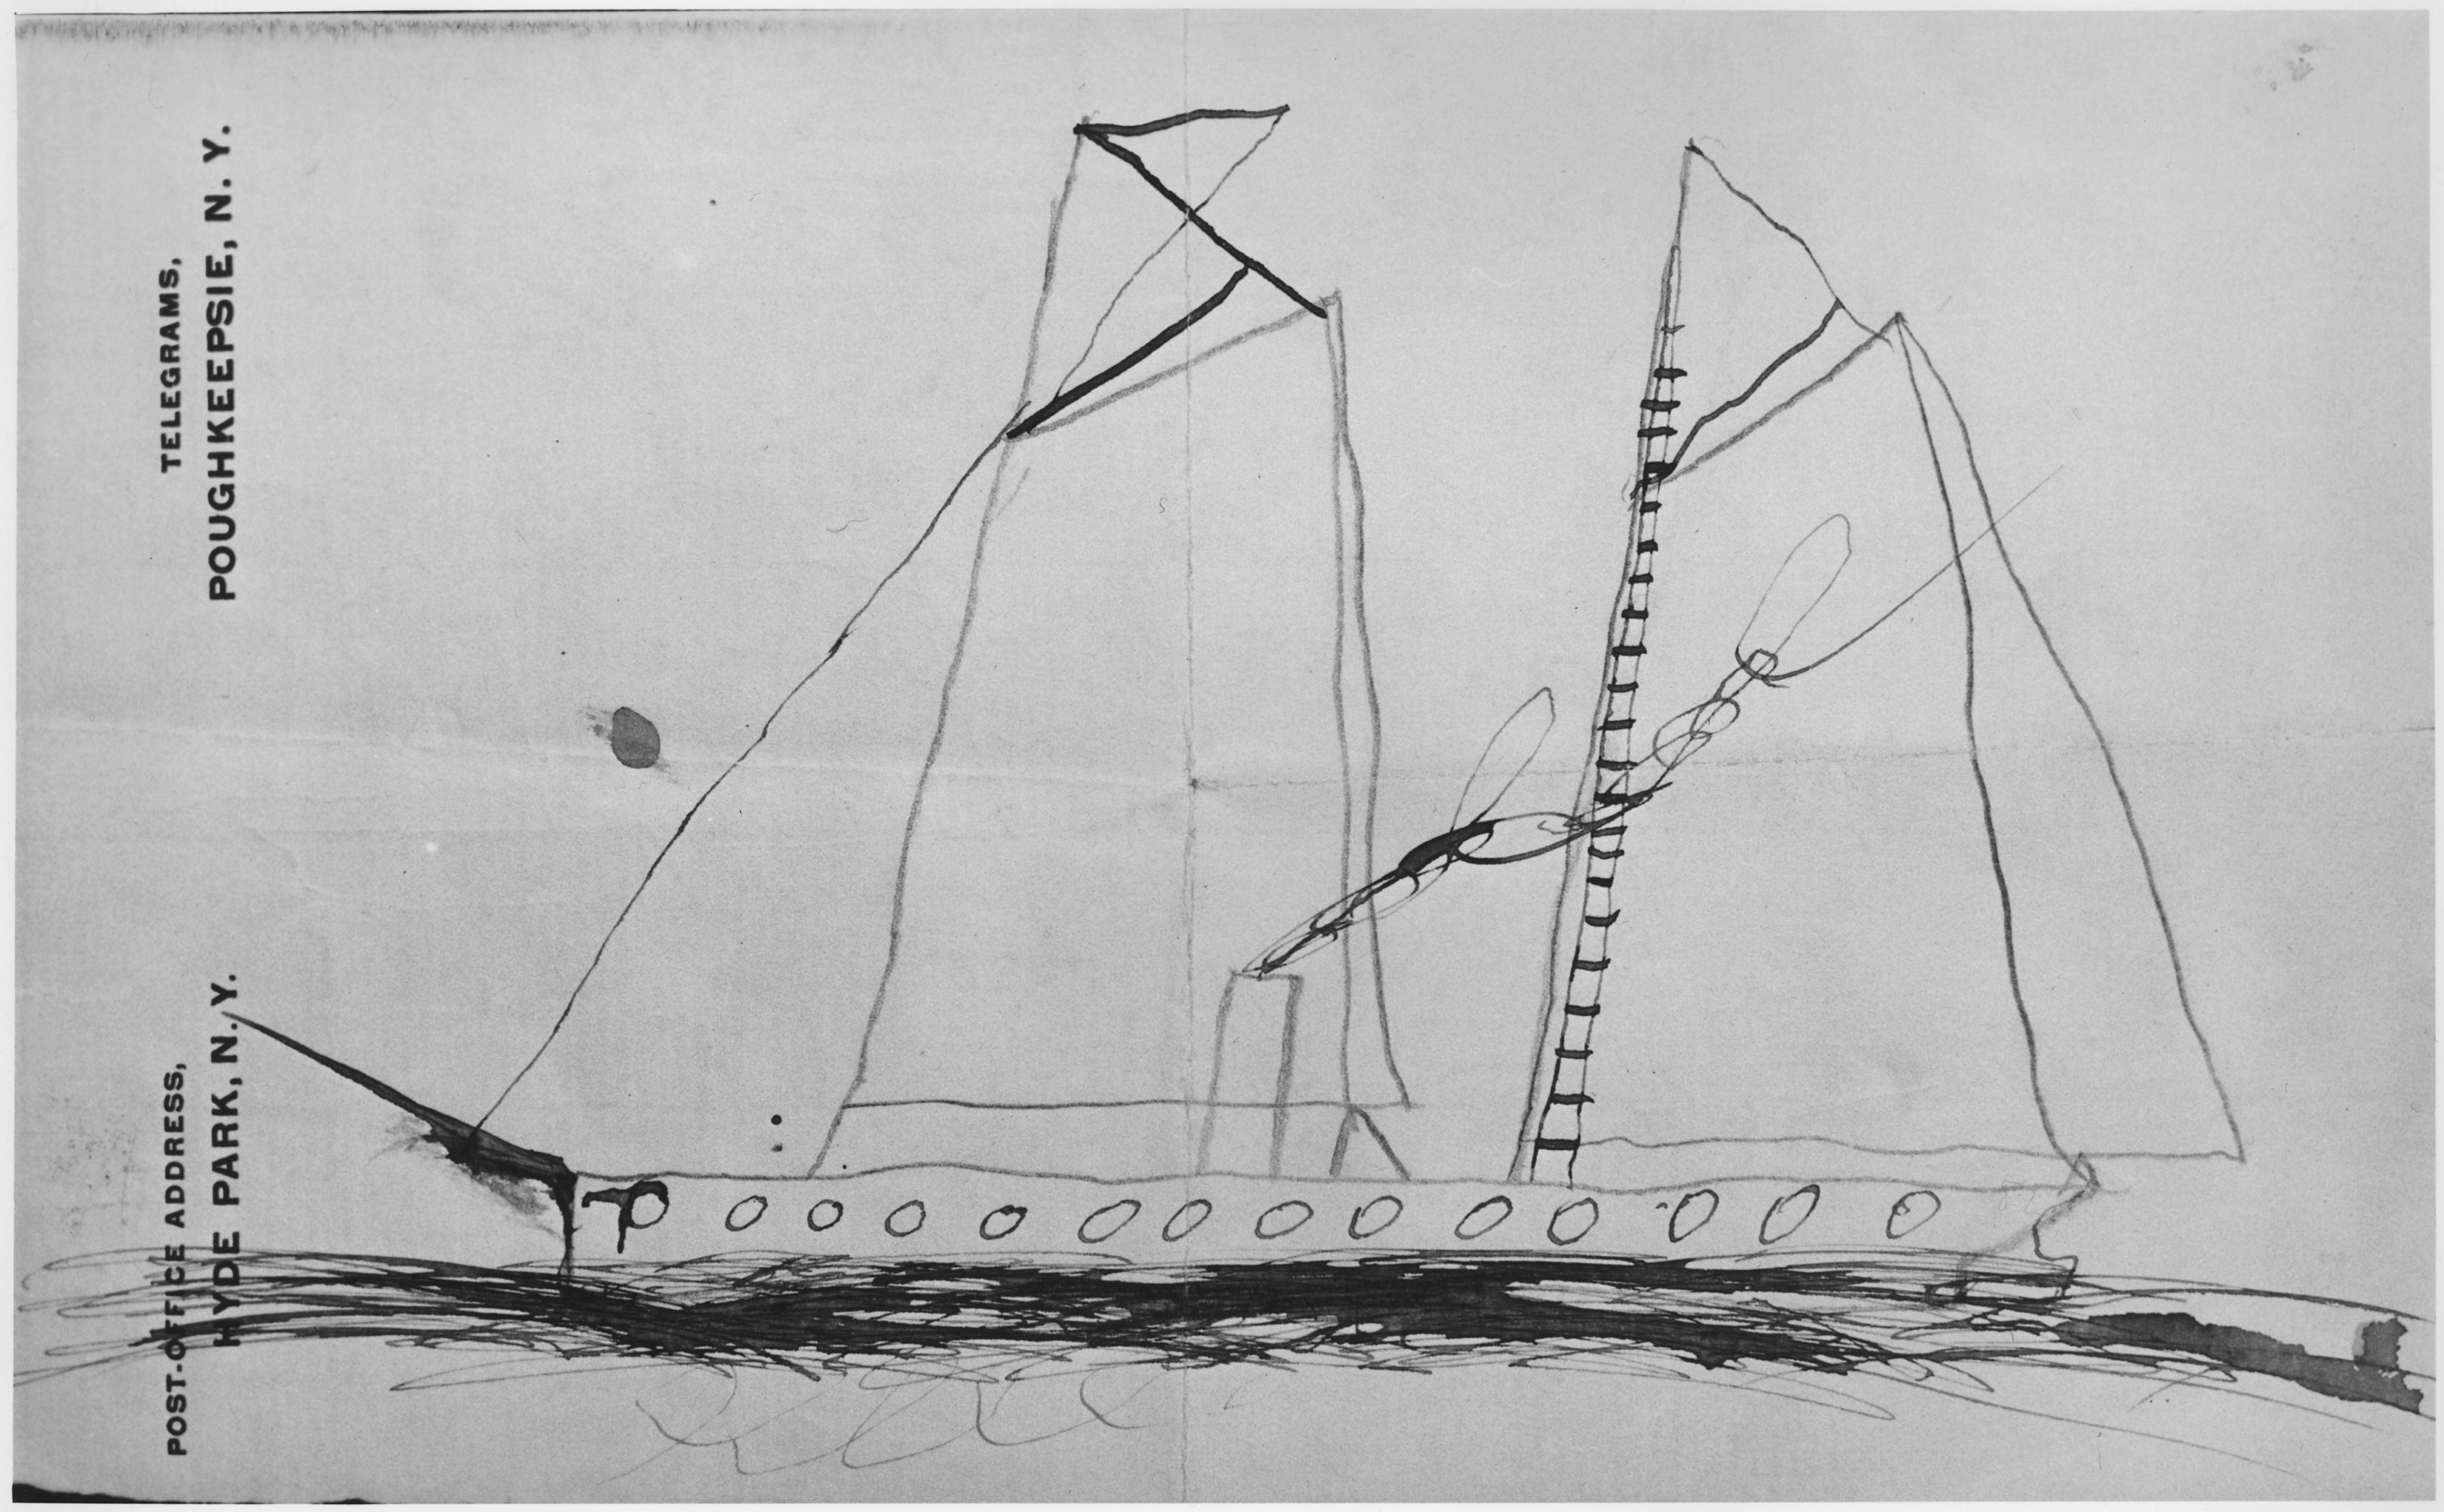 Childhood Drawing of a Sailing Ship by Franklin D. Roosevelt - NARA - 198134